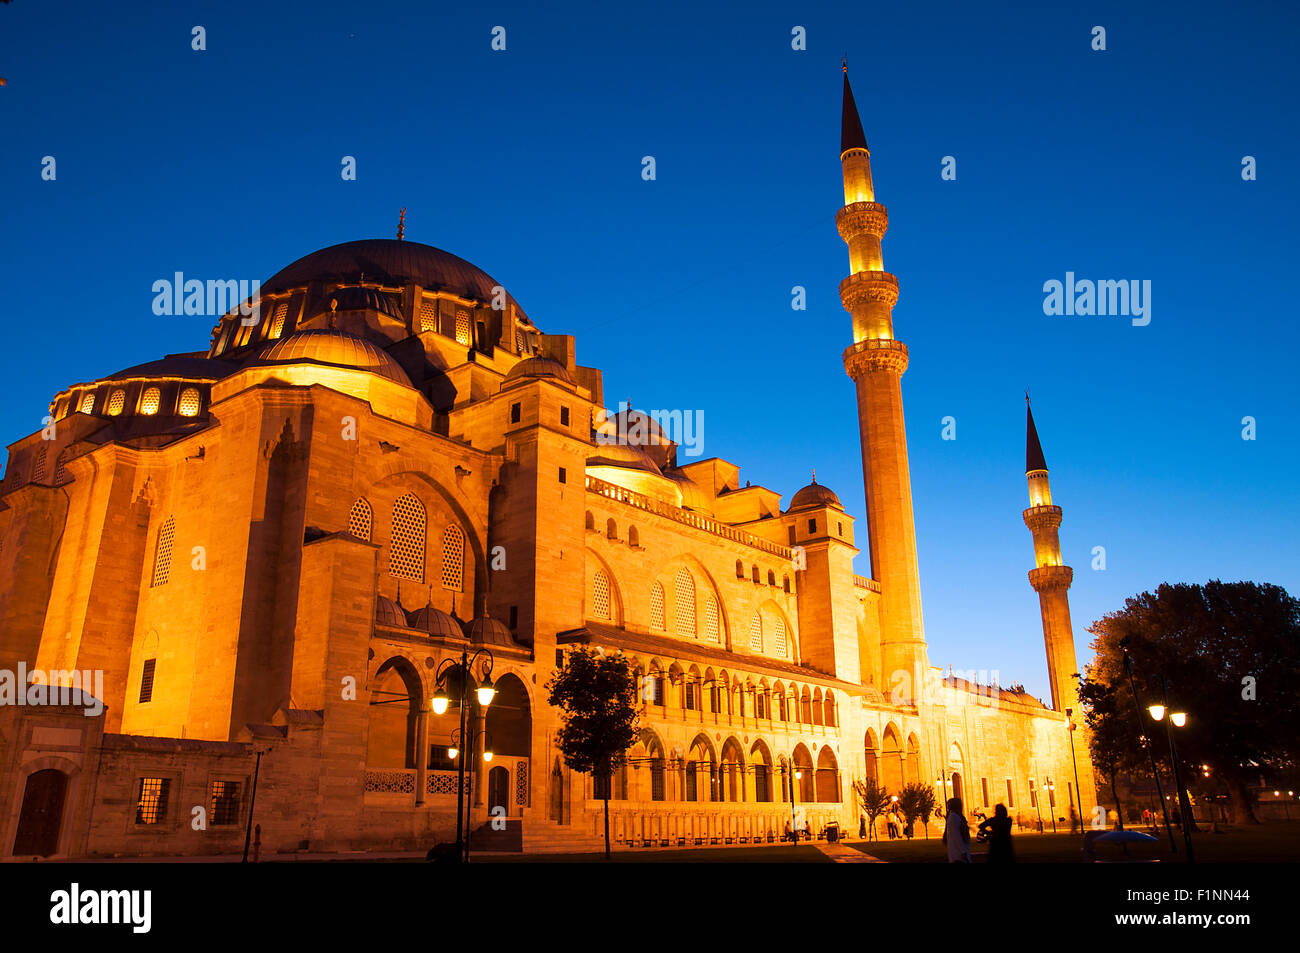 Suleymaniye Mosque at night view from garden of the mosque Stock Photo